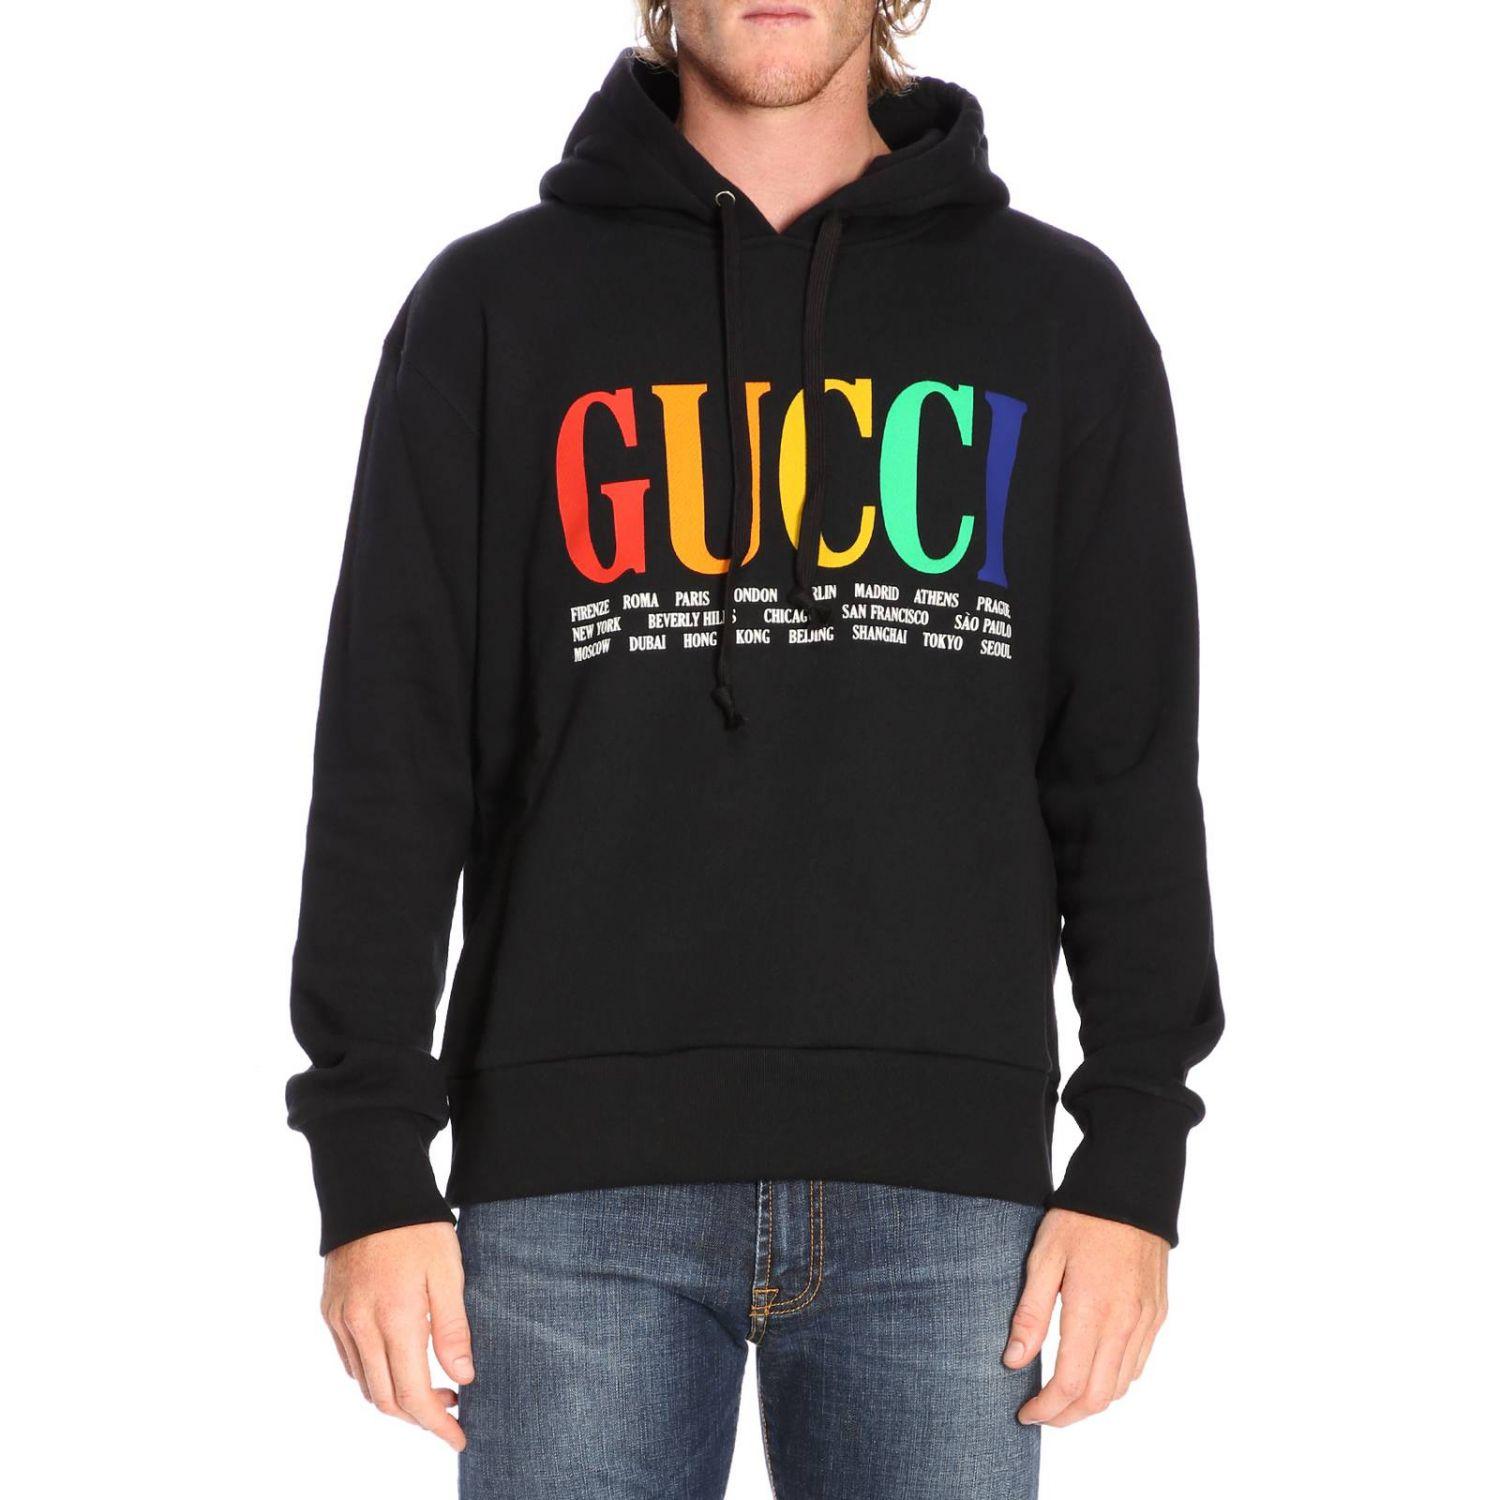 Gucci Cotton Cities Hooded Sweatshirt in Black for Men - Save 30% - Lyst